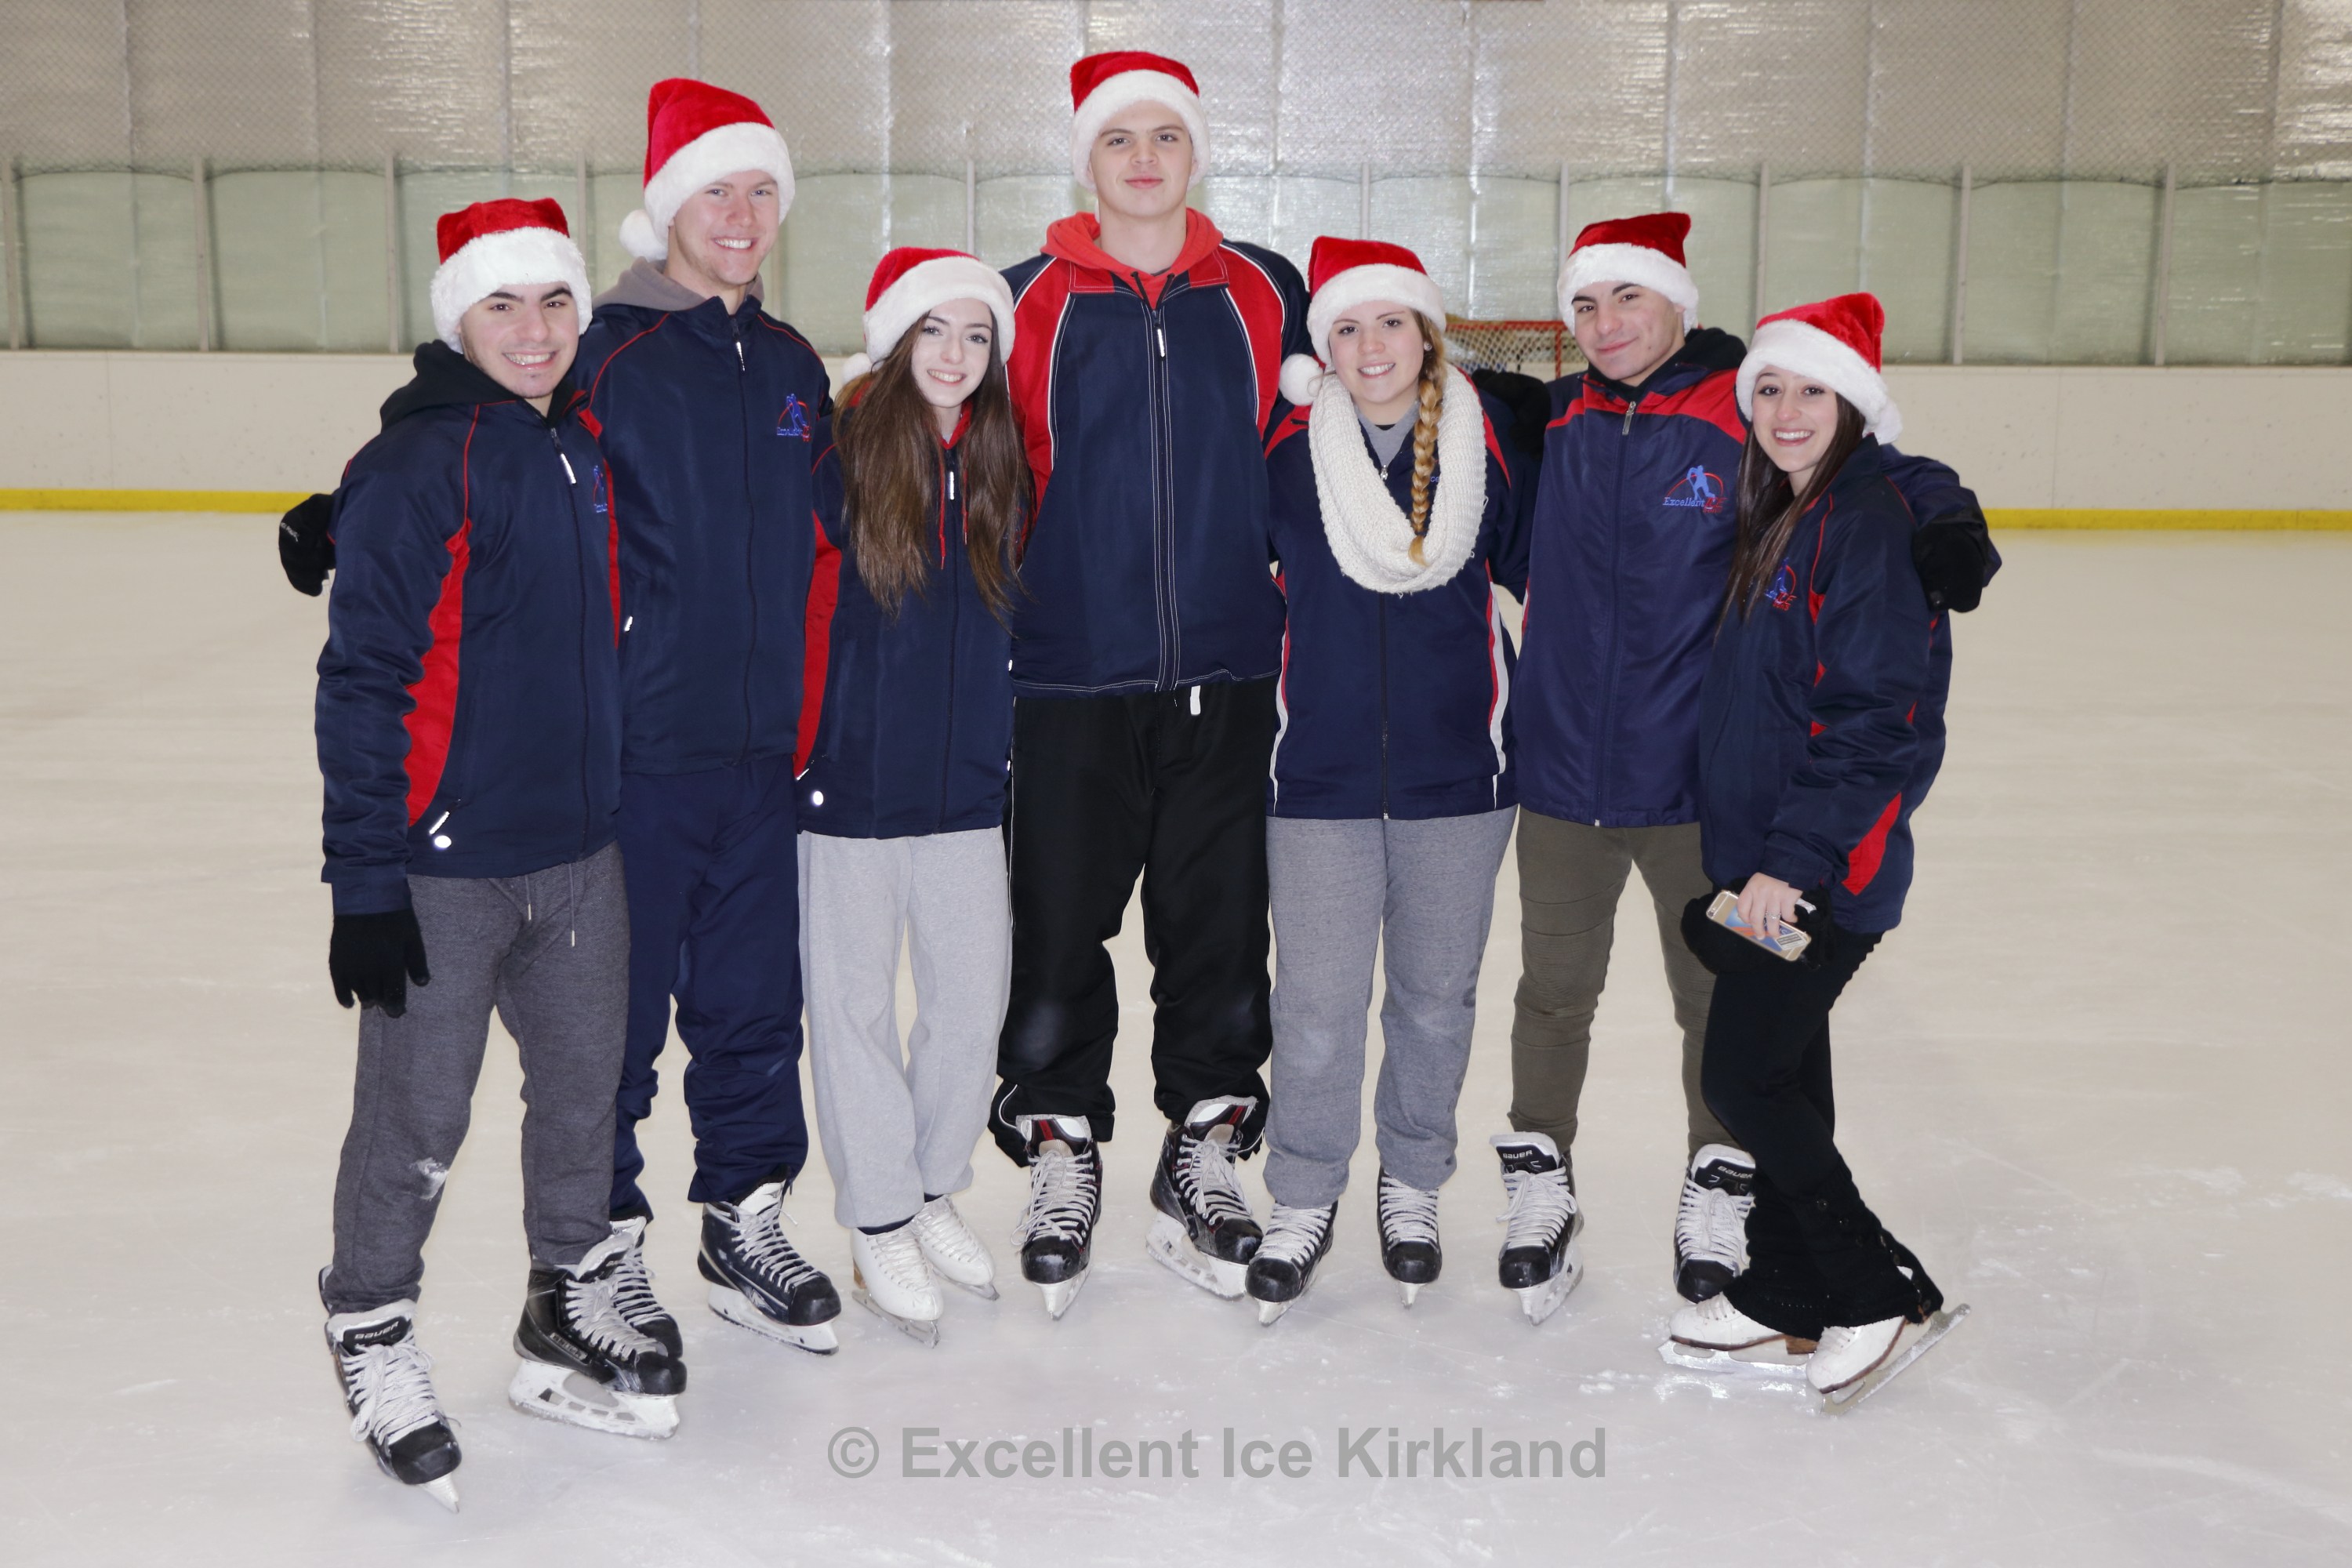 Holiday time with Learn to Skate! | Excellent Ice Kirkland